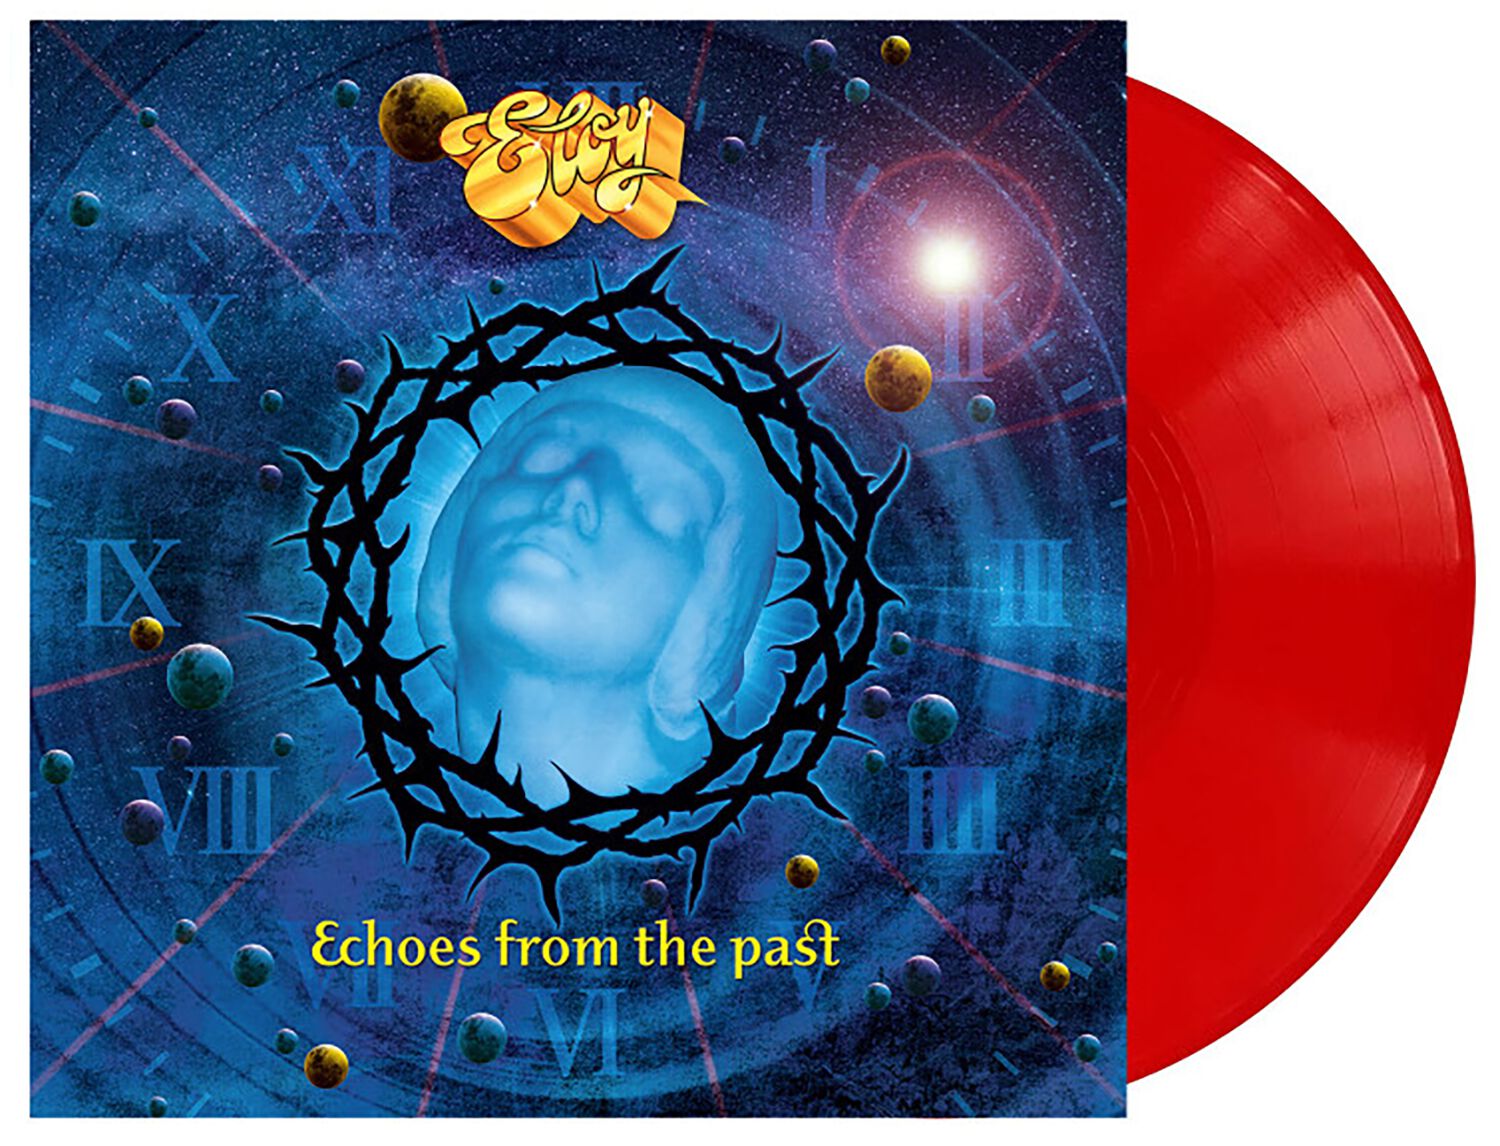 Echoes from the past LP von Eloy